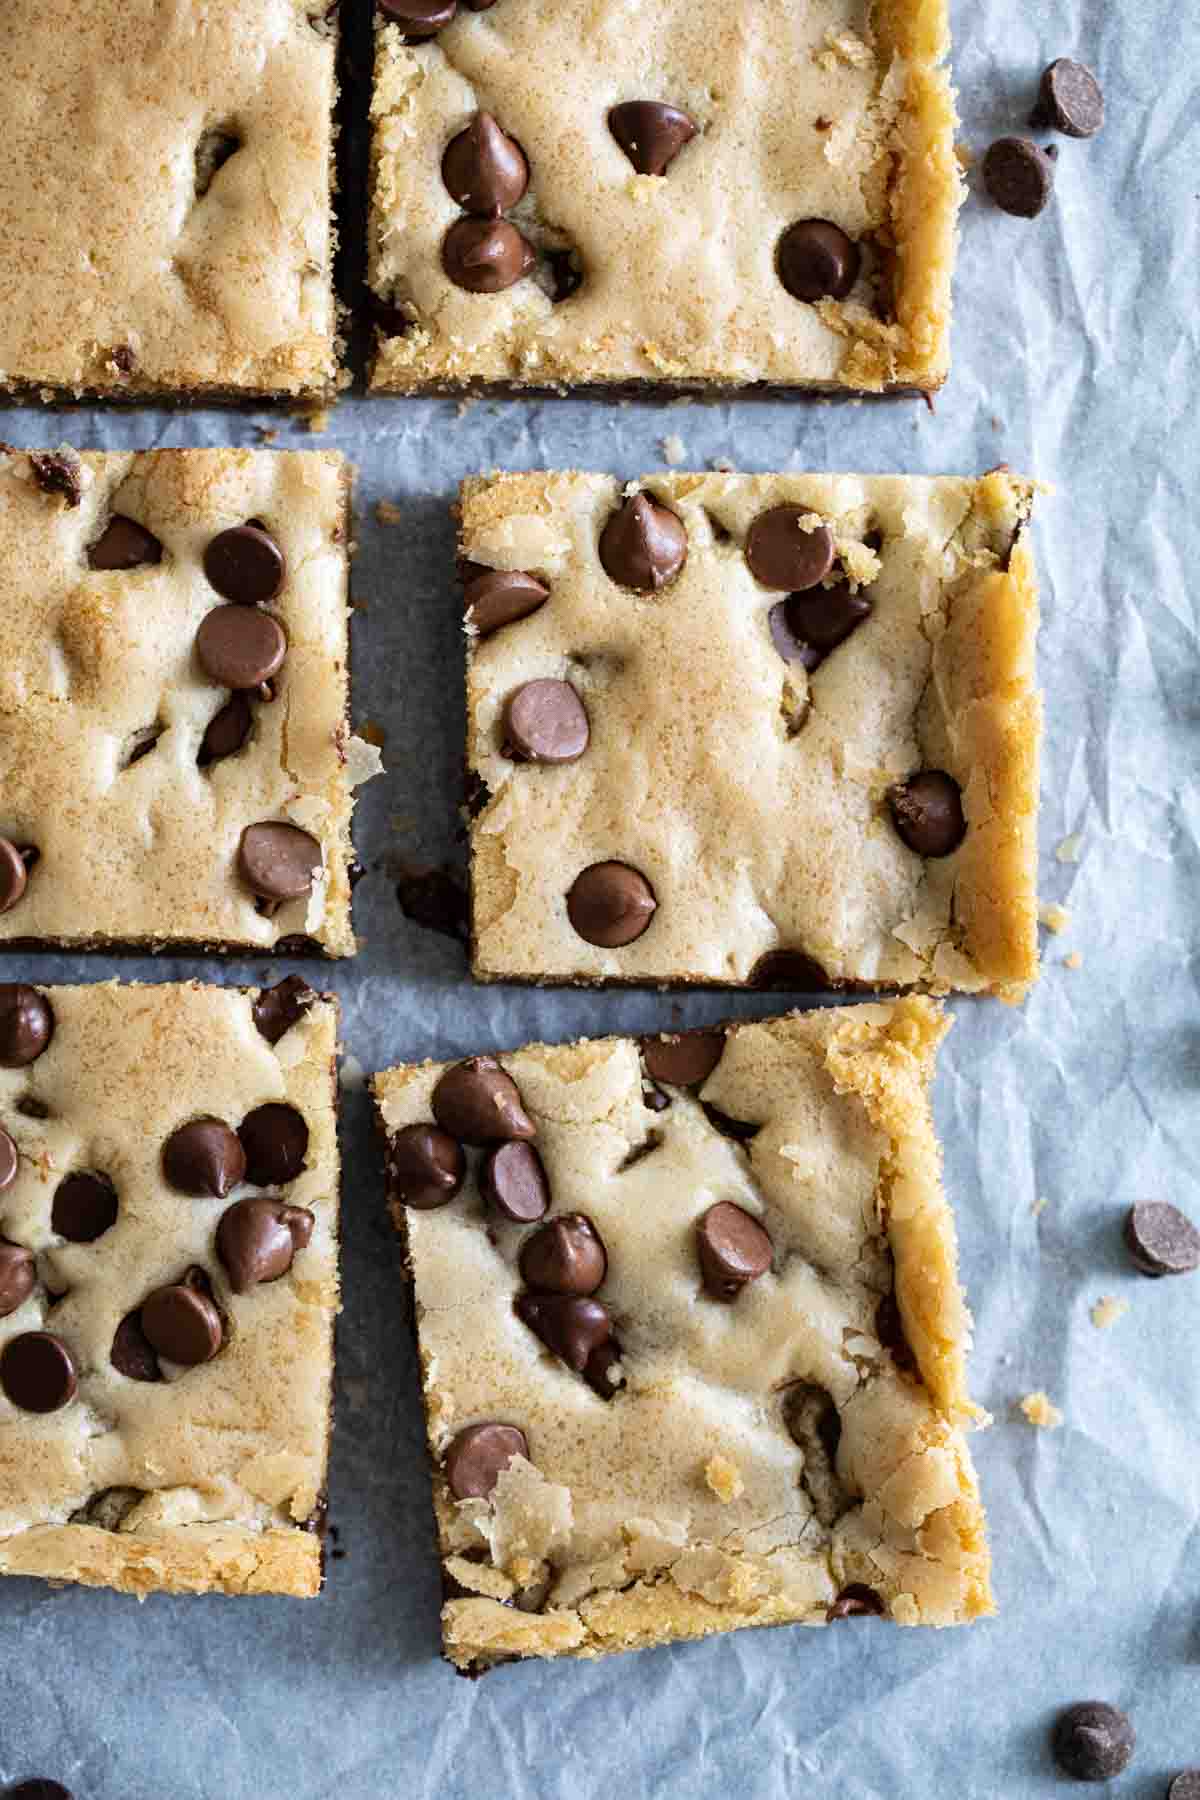 Chocolate Chip Cream Cheese Cookie Bars - Adventures of a DIY Mom